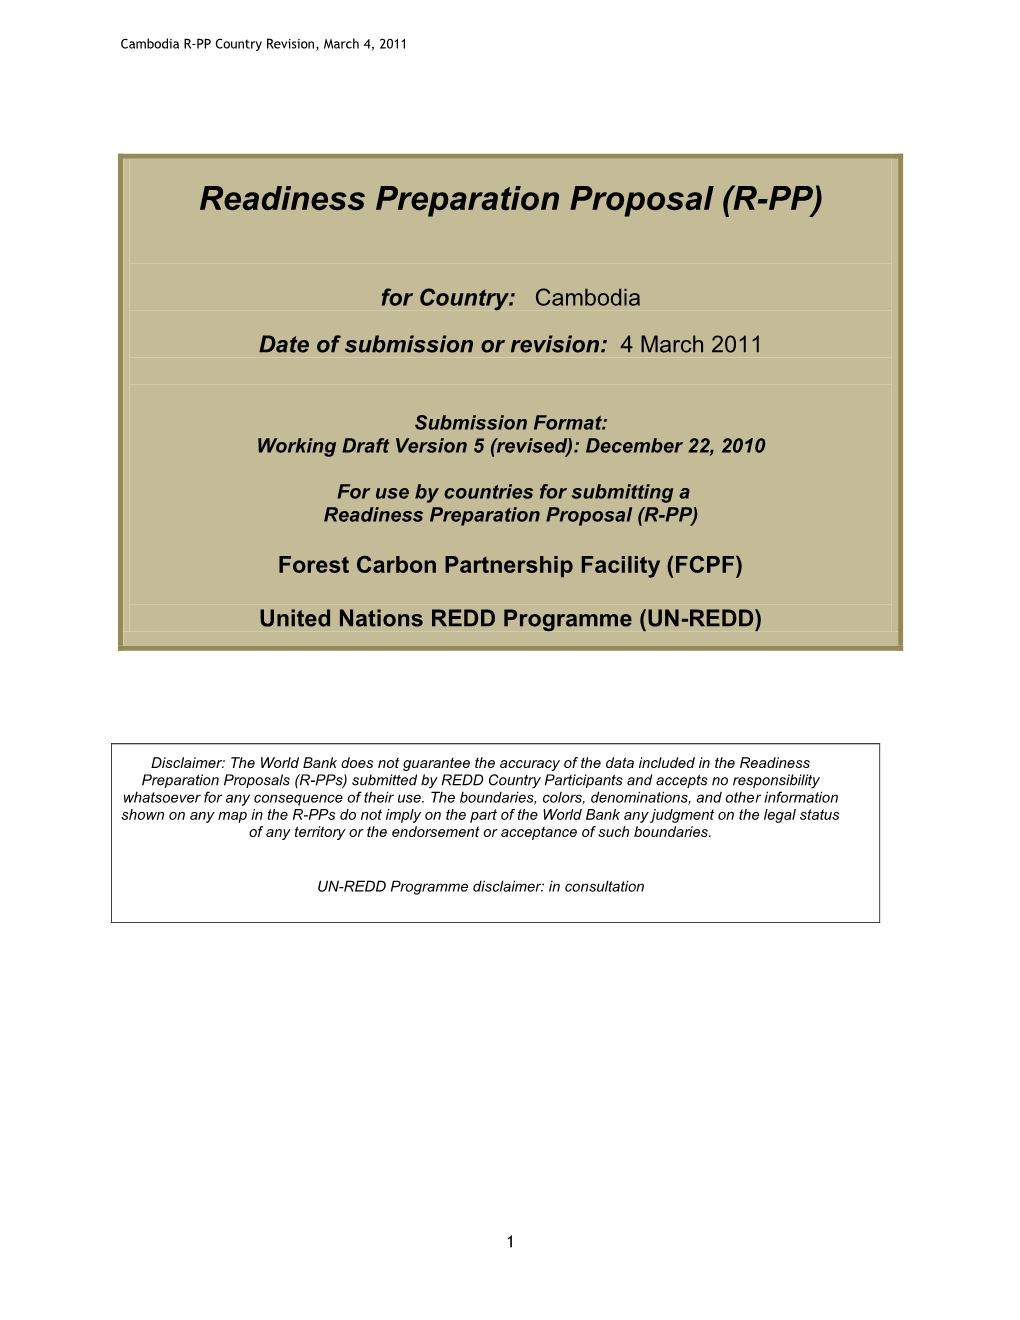 Readiness Preparation Proposal (R-PP)